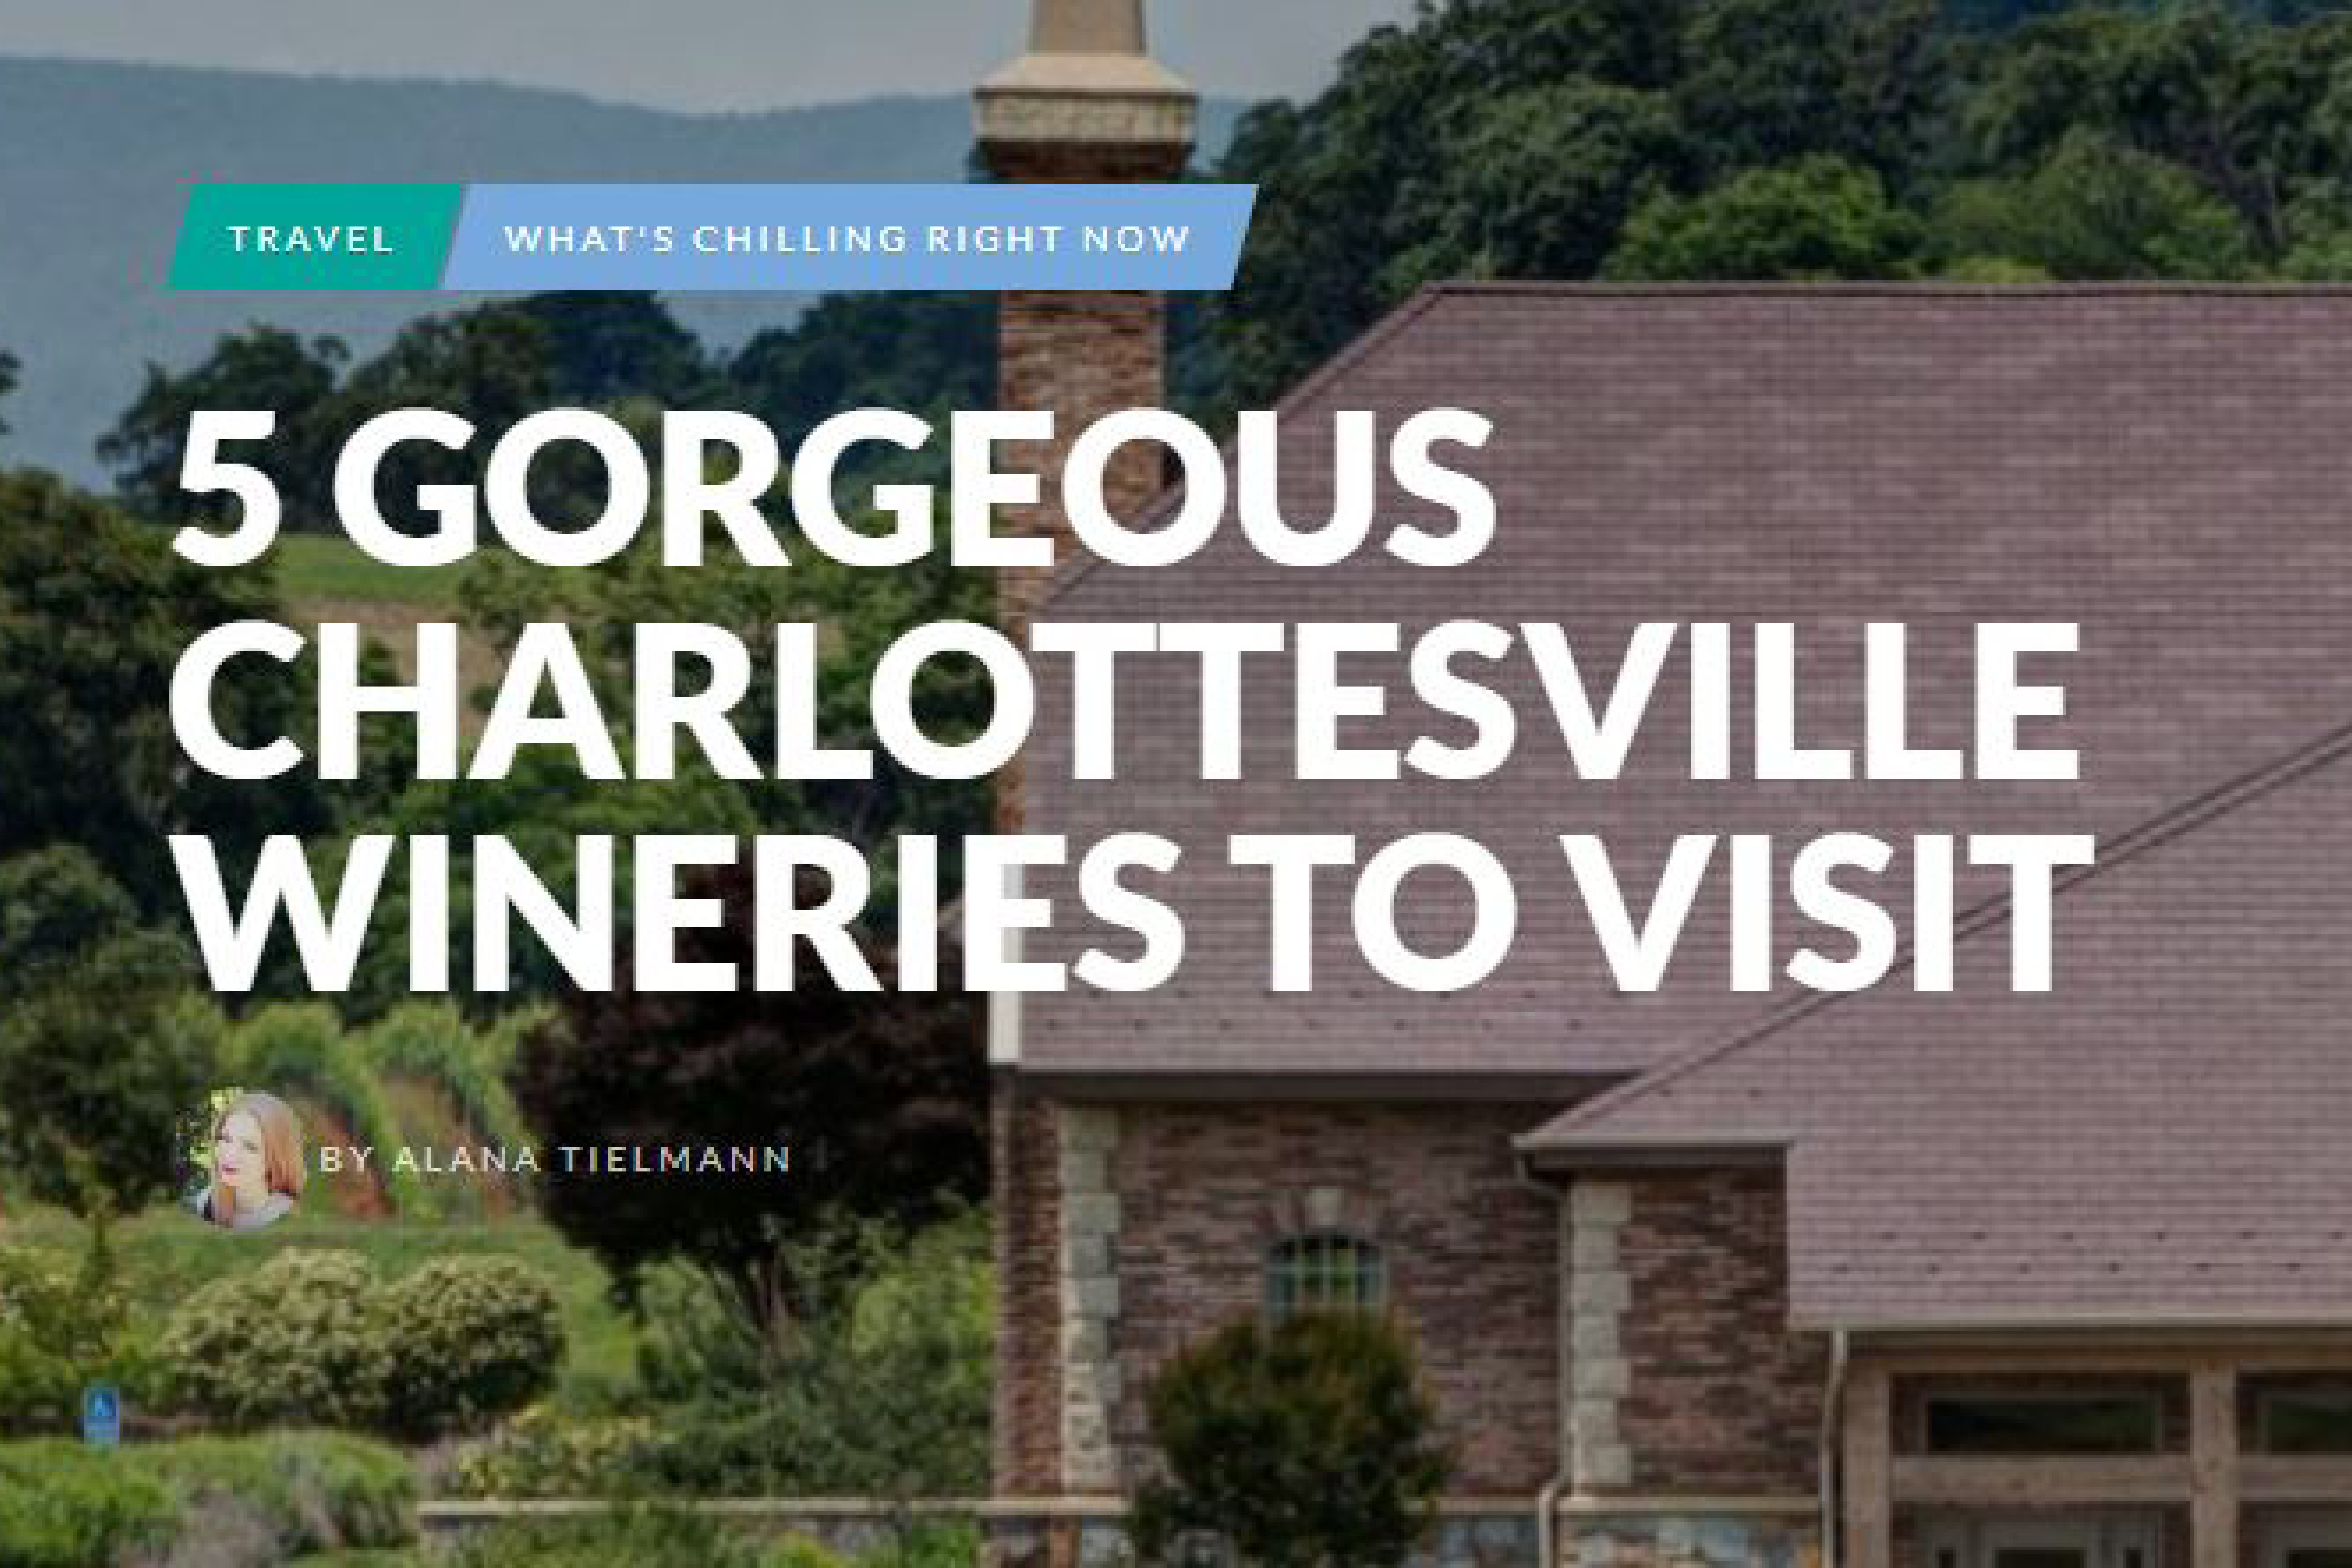 5 Gorgeous Charlottesville Wineries to Visit